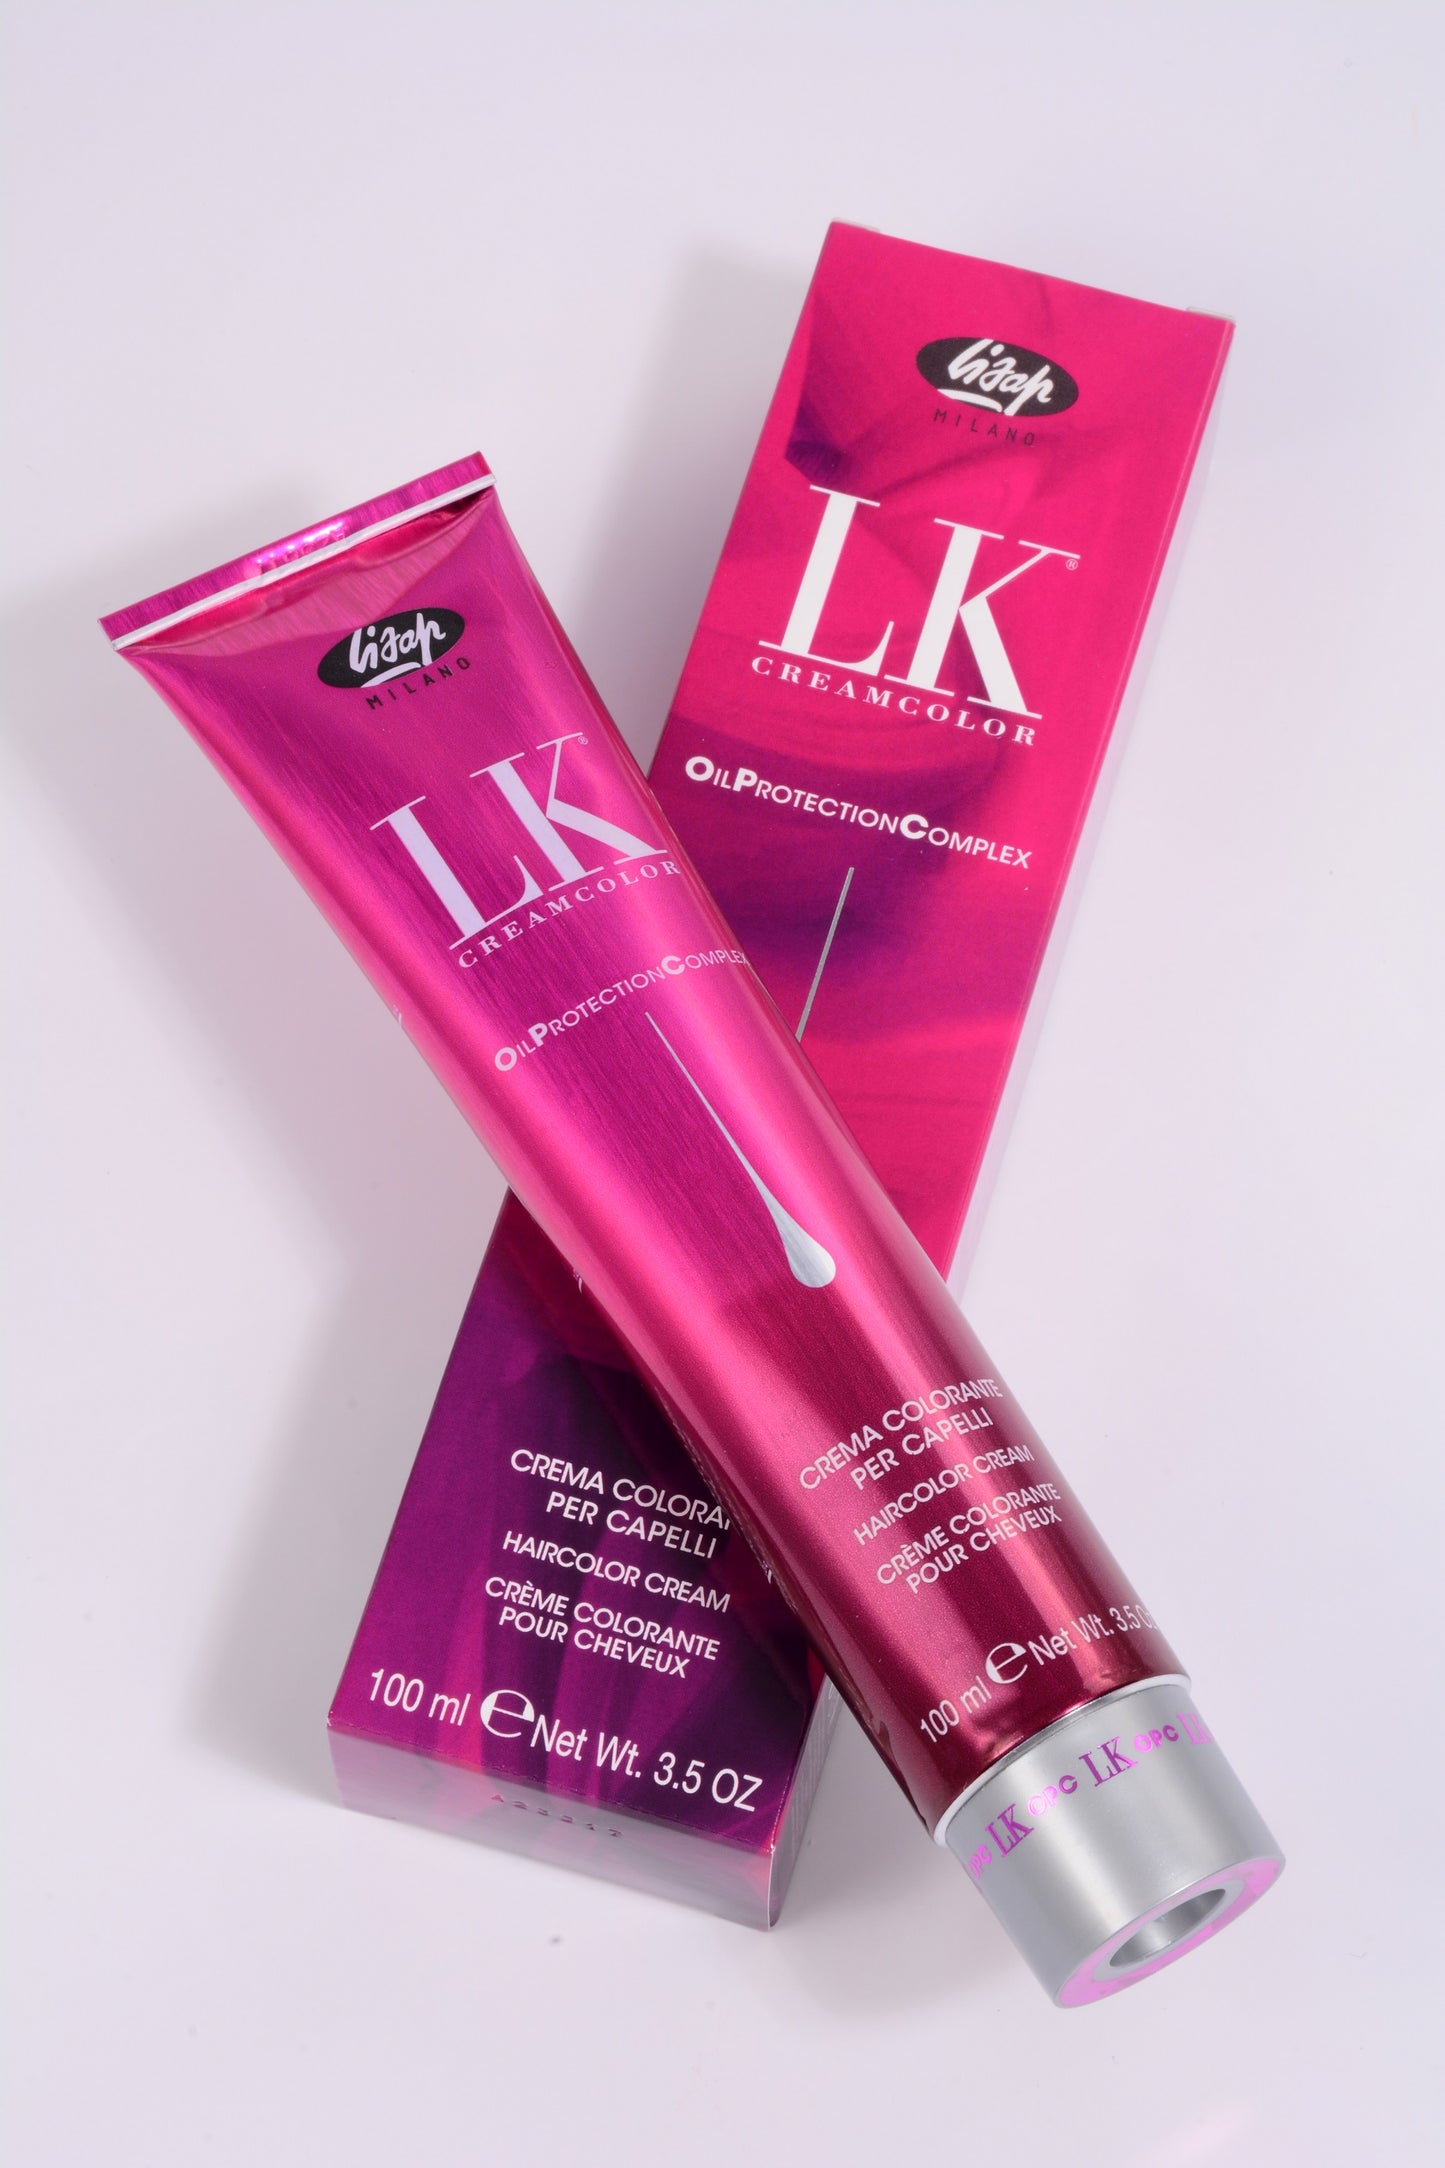 LK Creamcolor 6/6 Oil Protection Complex